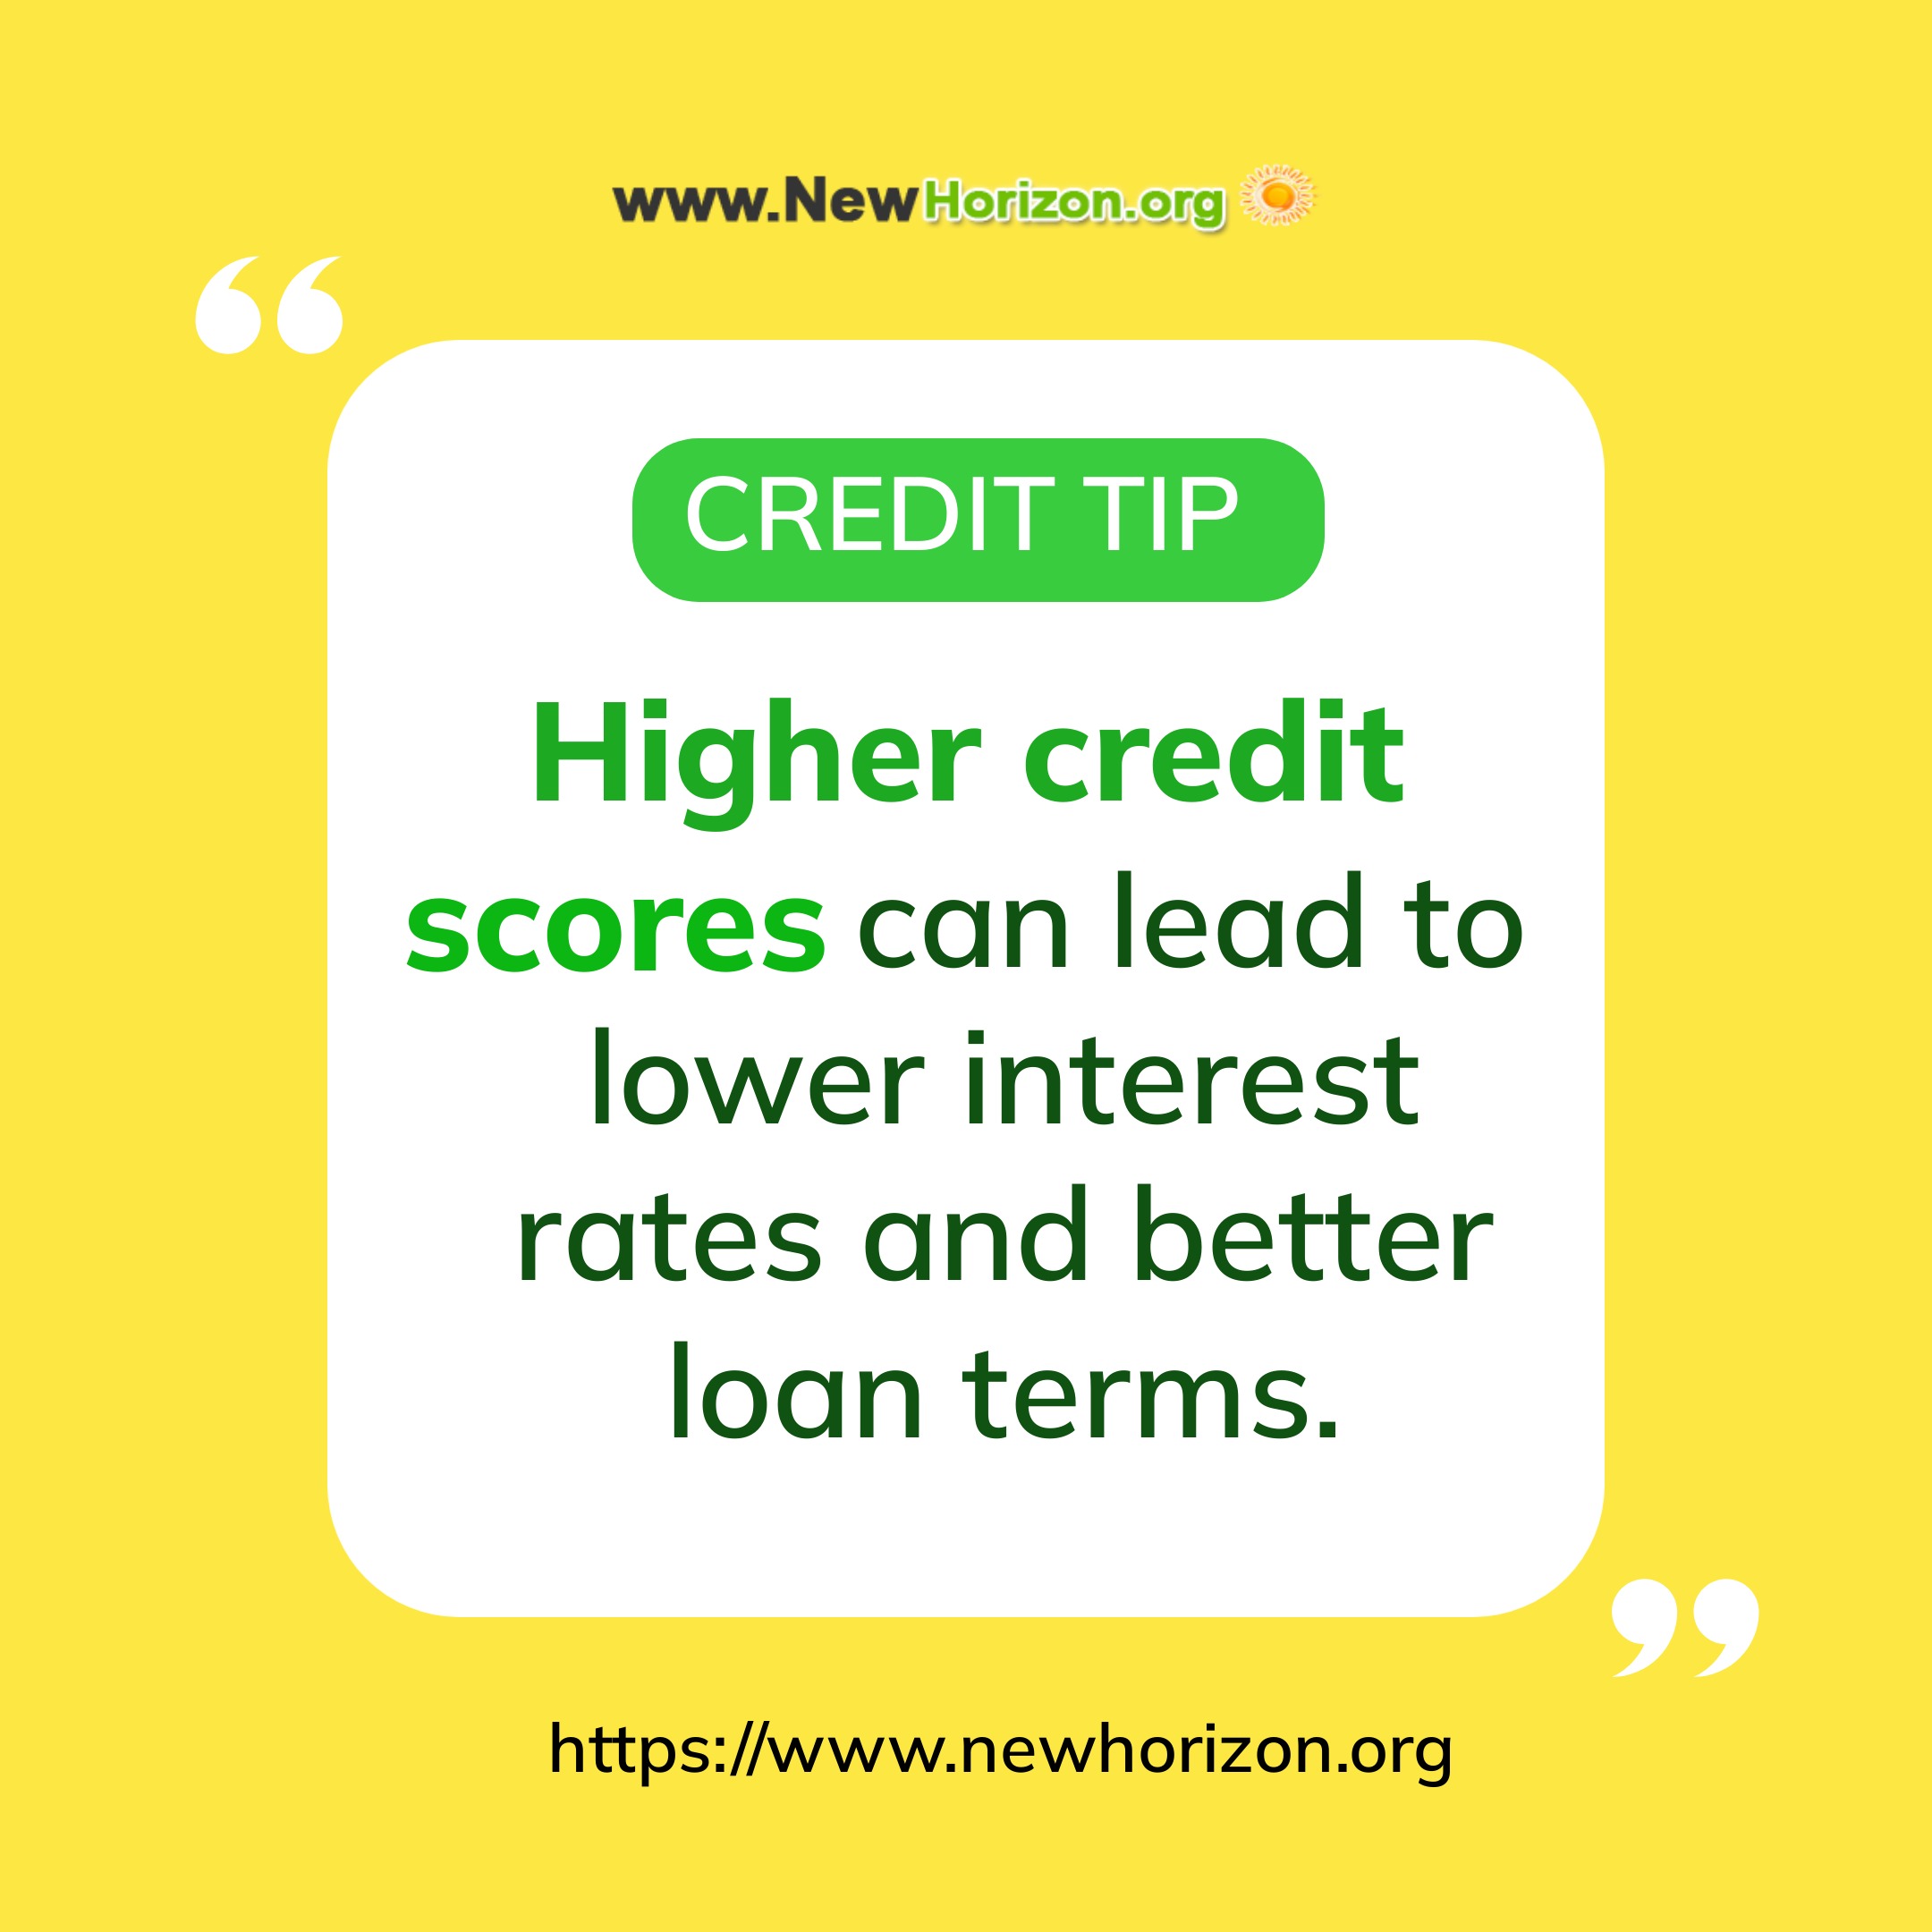 Higher credit scores can lead to better loan terms and interest rates